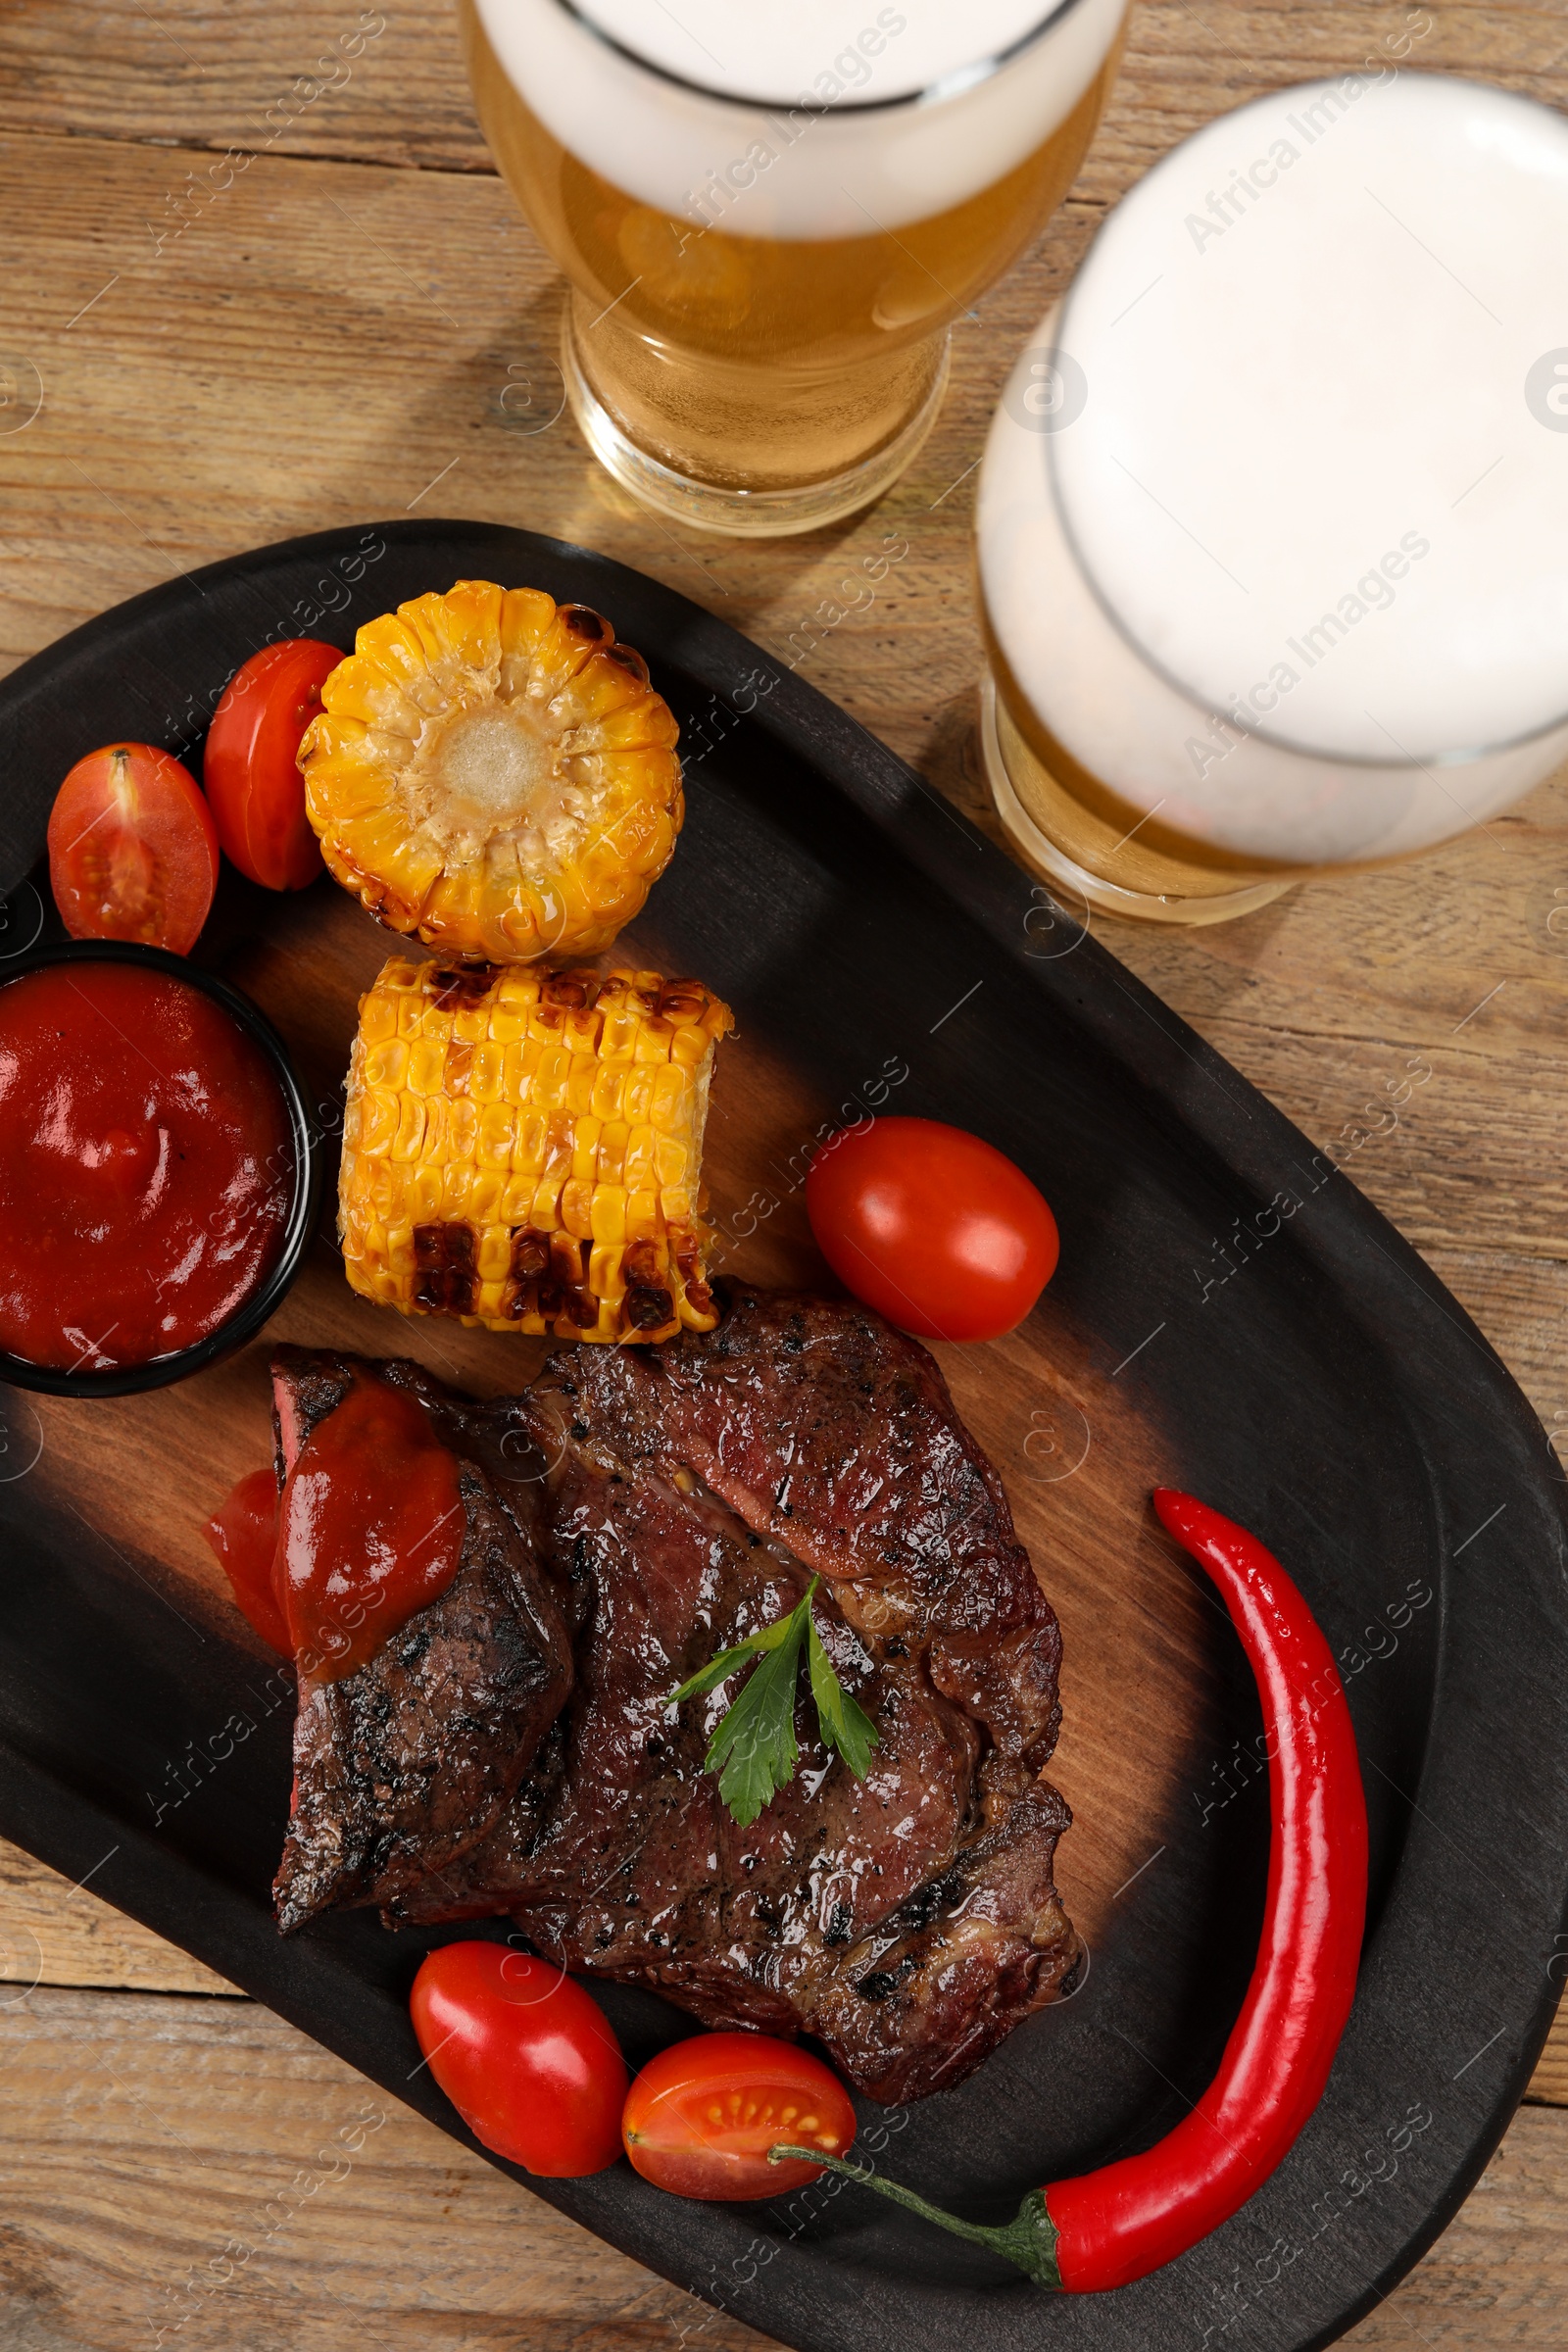 Photo of Glasses of beer, delicious fried steak and ingredients on wooden table, flat lay